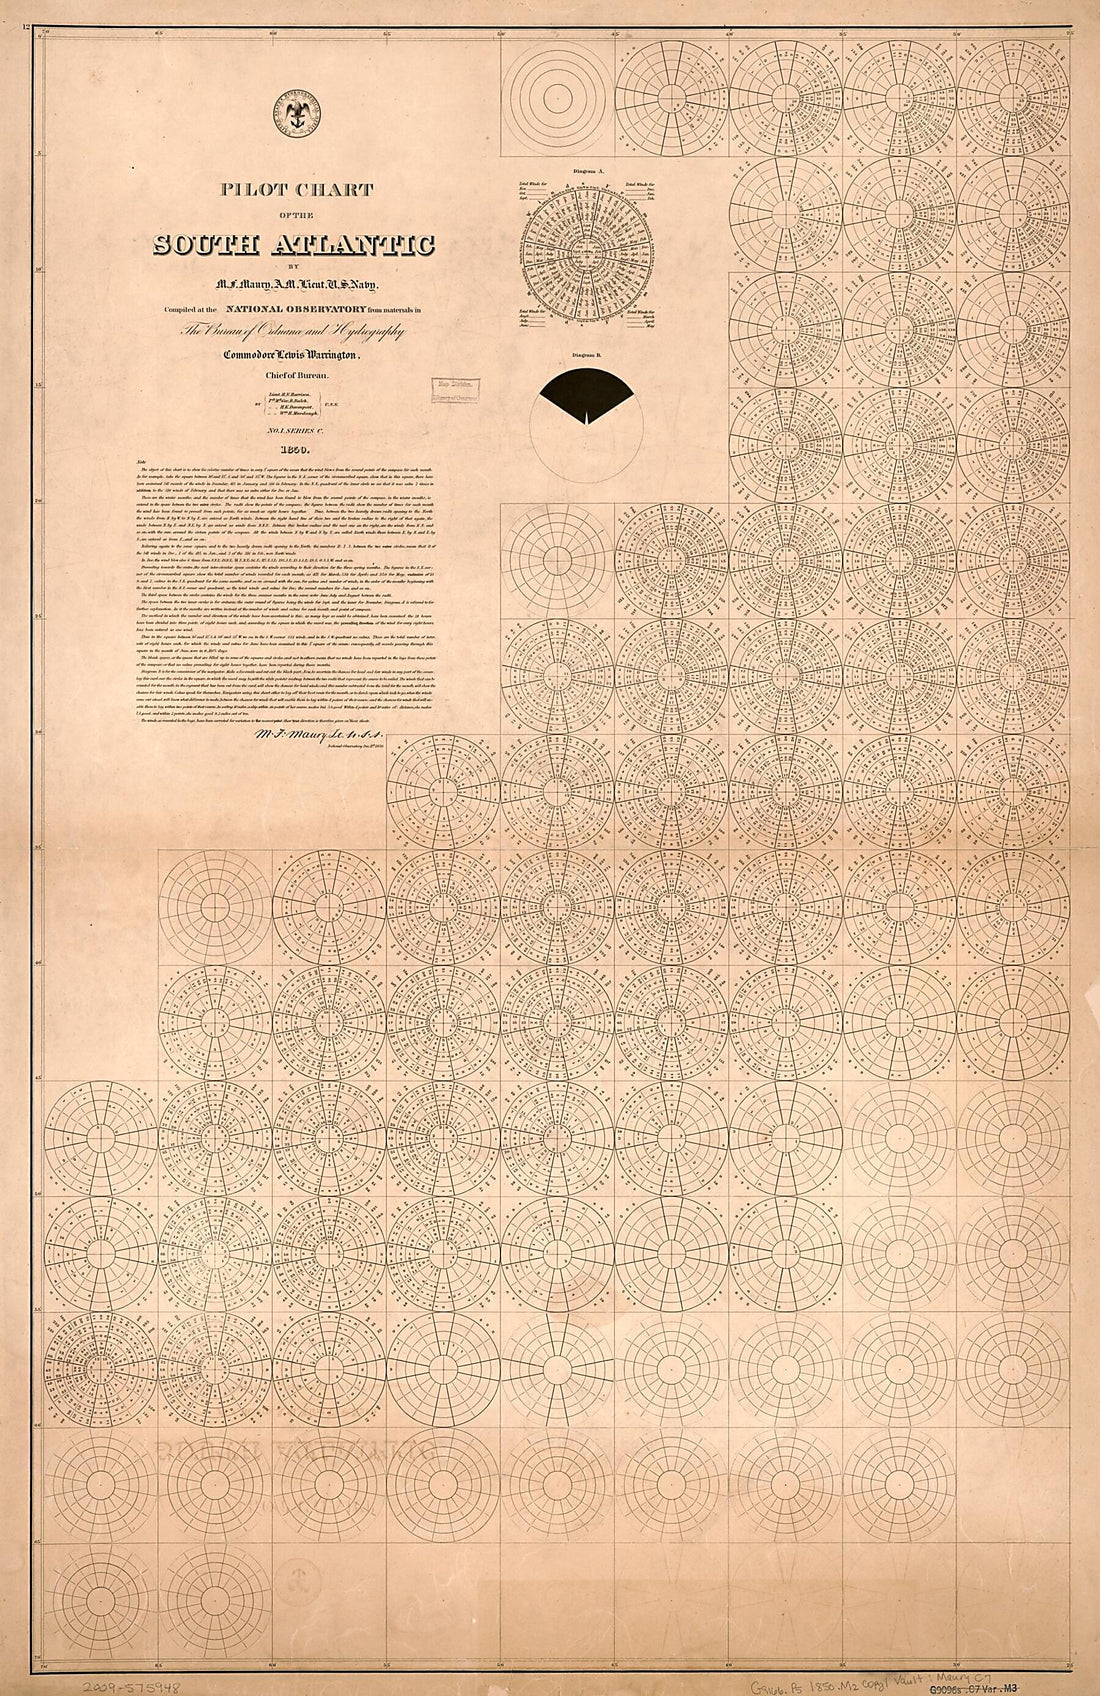 This old map of Pilot Chart of the South Atlantic (South Atlantic) from 1850 was created by Matthew Fontaine Maury,  United States Naval Observatory,  United States. Bureau of Ordnance and Hydrography,  United States. Hydrographic Office, L. (Lewis) Warr